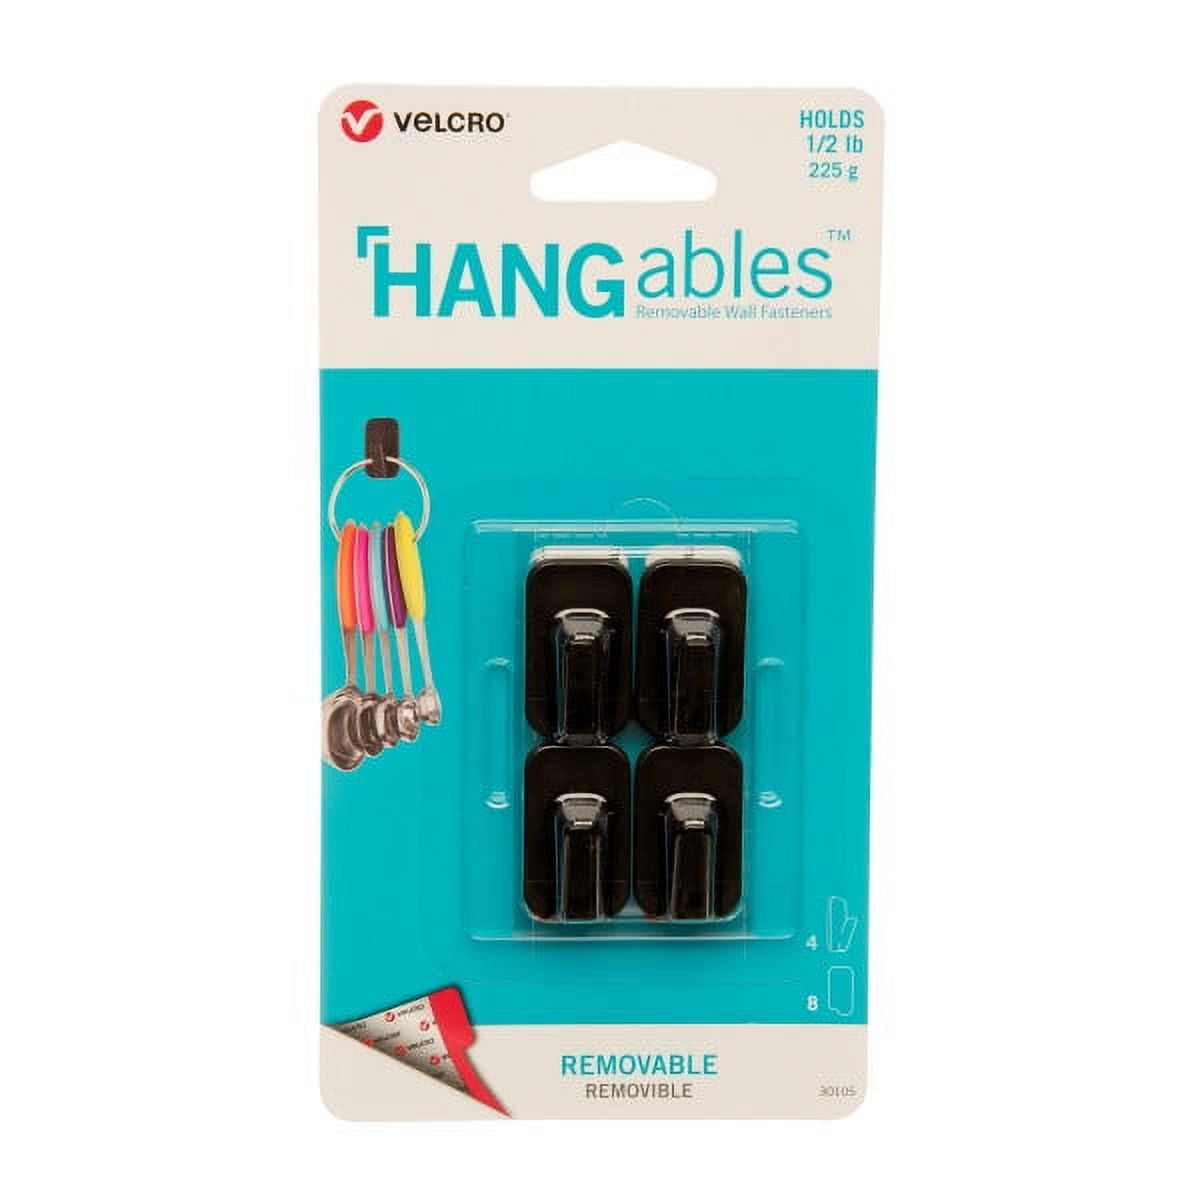 VELCRO Brand HANGables Permanent Adhesive Hooks, Plastic Hanging Hook for  Rough and Smooth Surfaces, Indoor and Outdoor Fasteners for Lightweight  Items